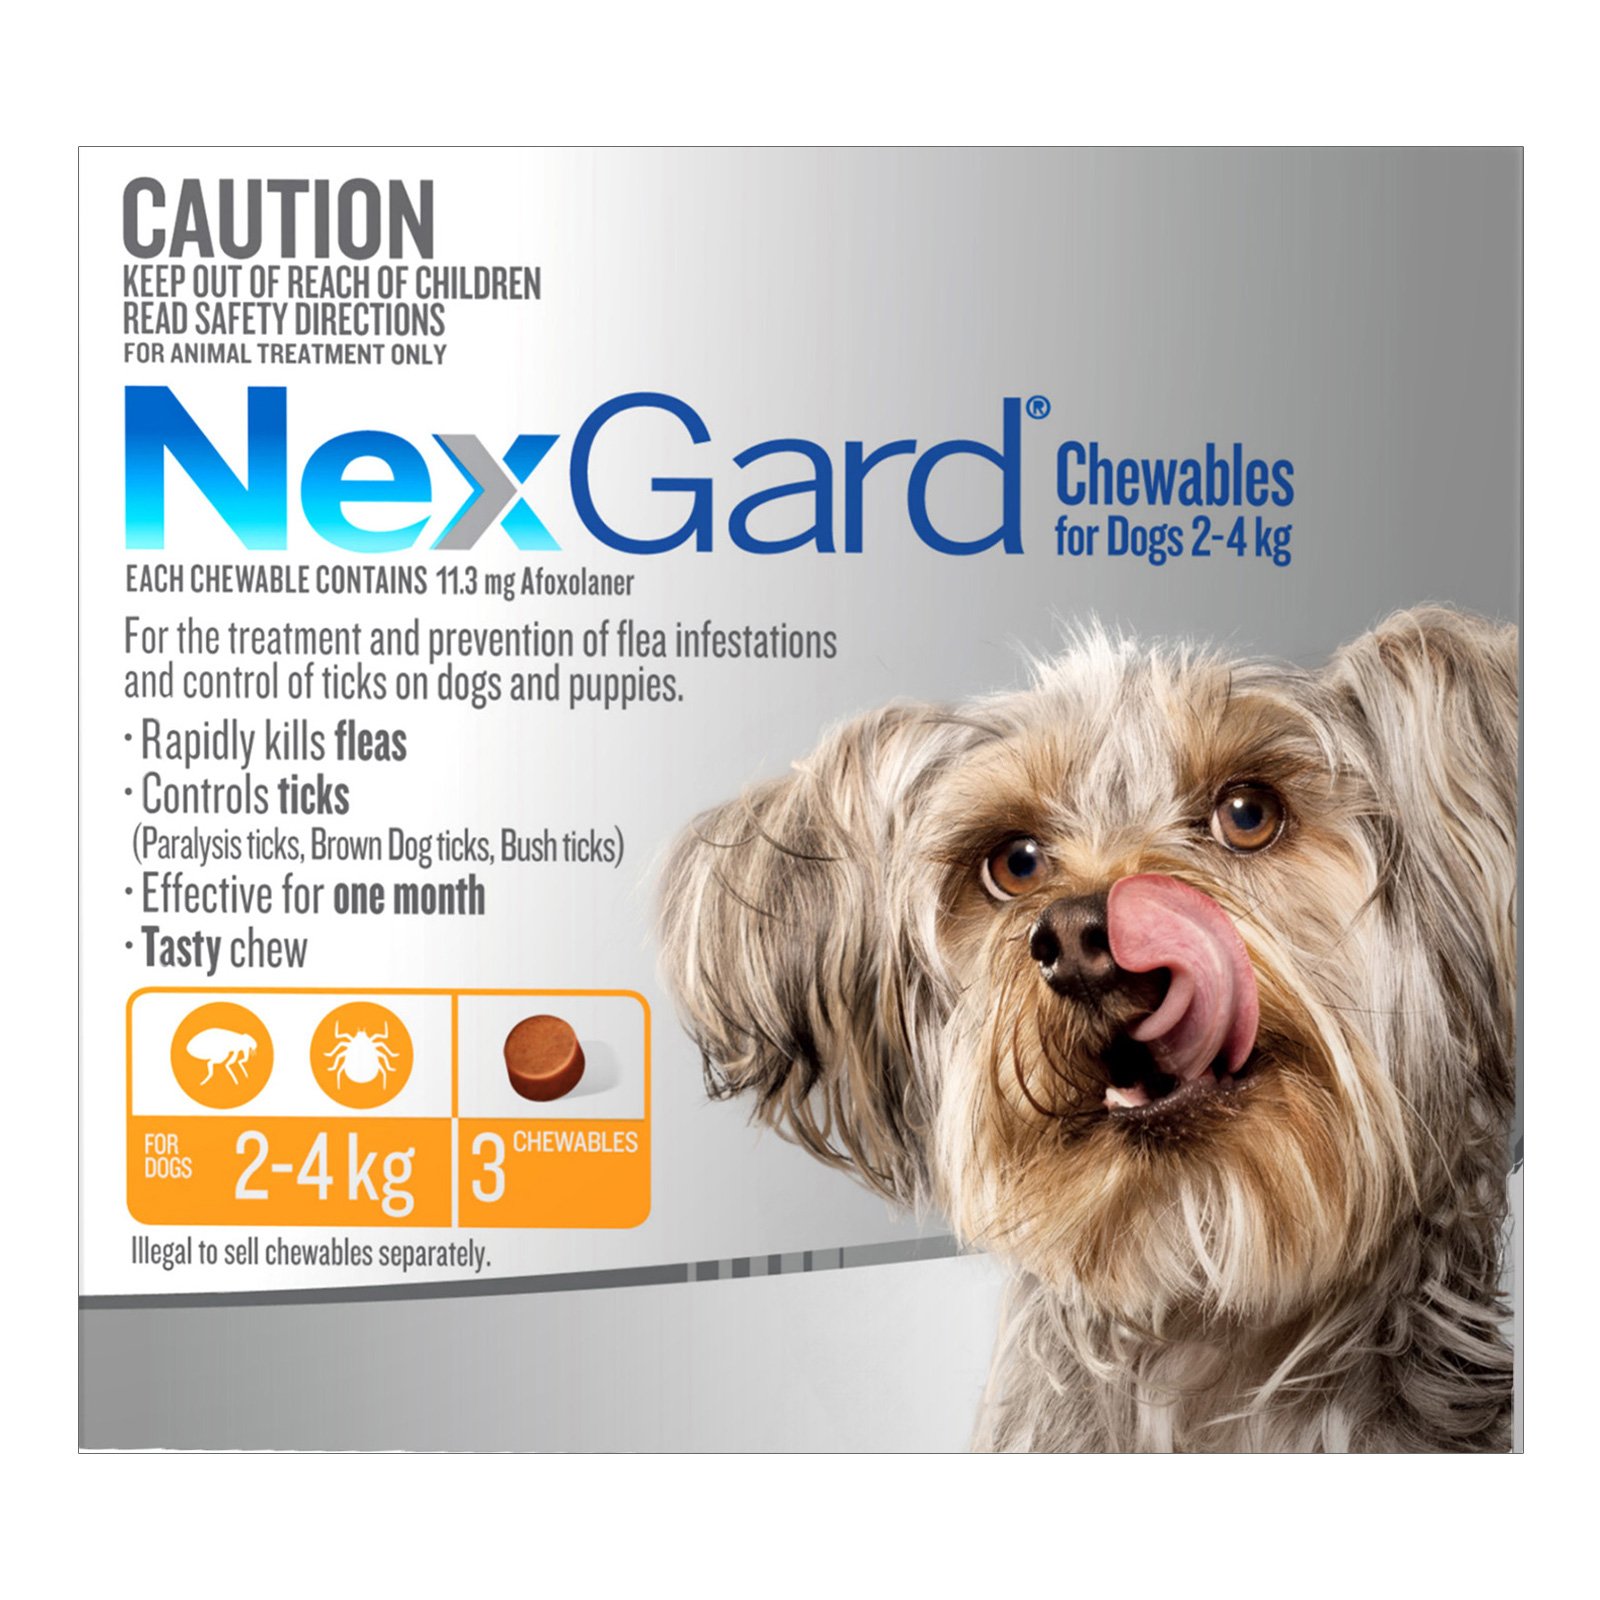 Nexgard Chewables For Very Small Dogs (2 - 4 Kg) Orange